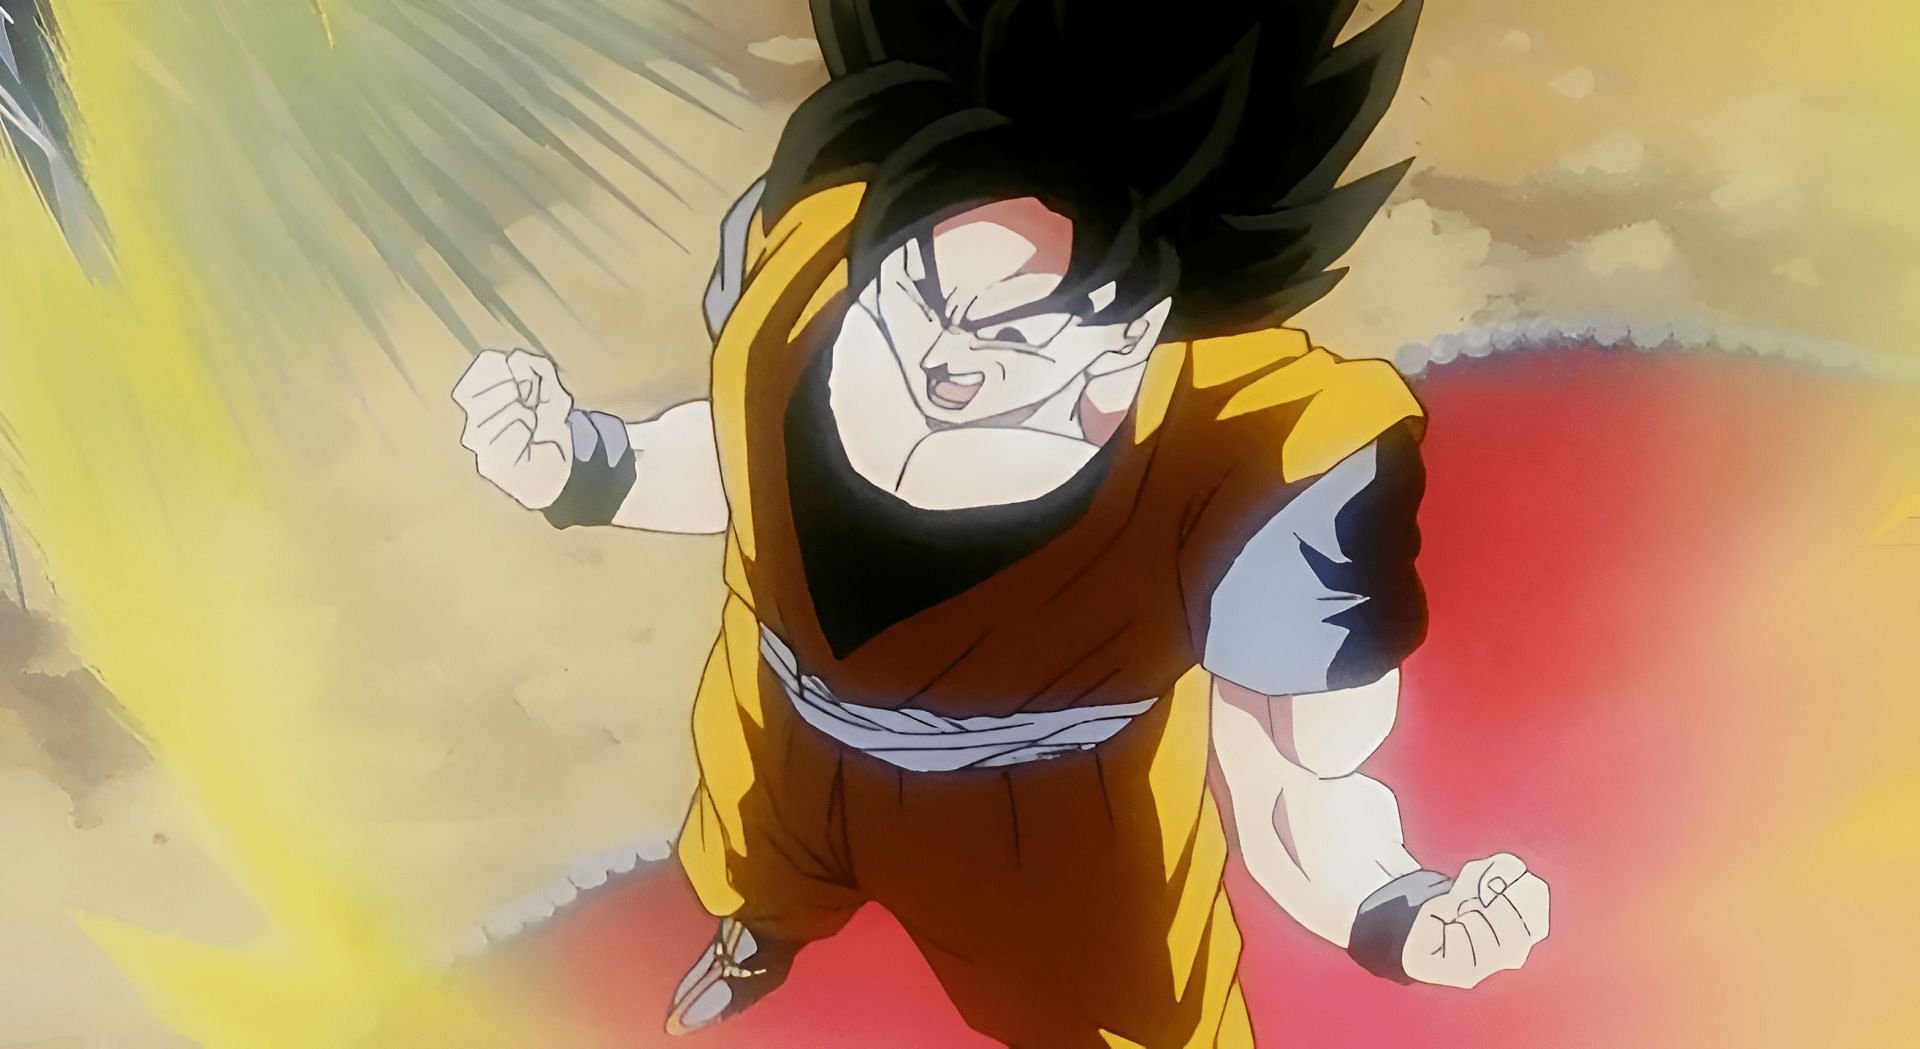 Dragon Ball: The rarest Super Saiyan from only appeared once (&amp; everyone missed it) (Image via Toei Animation)